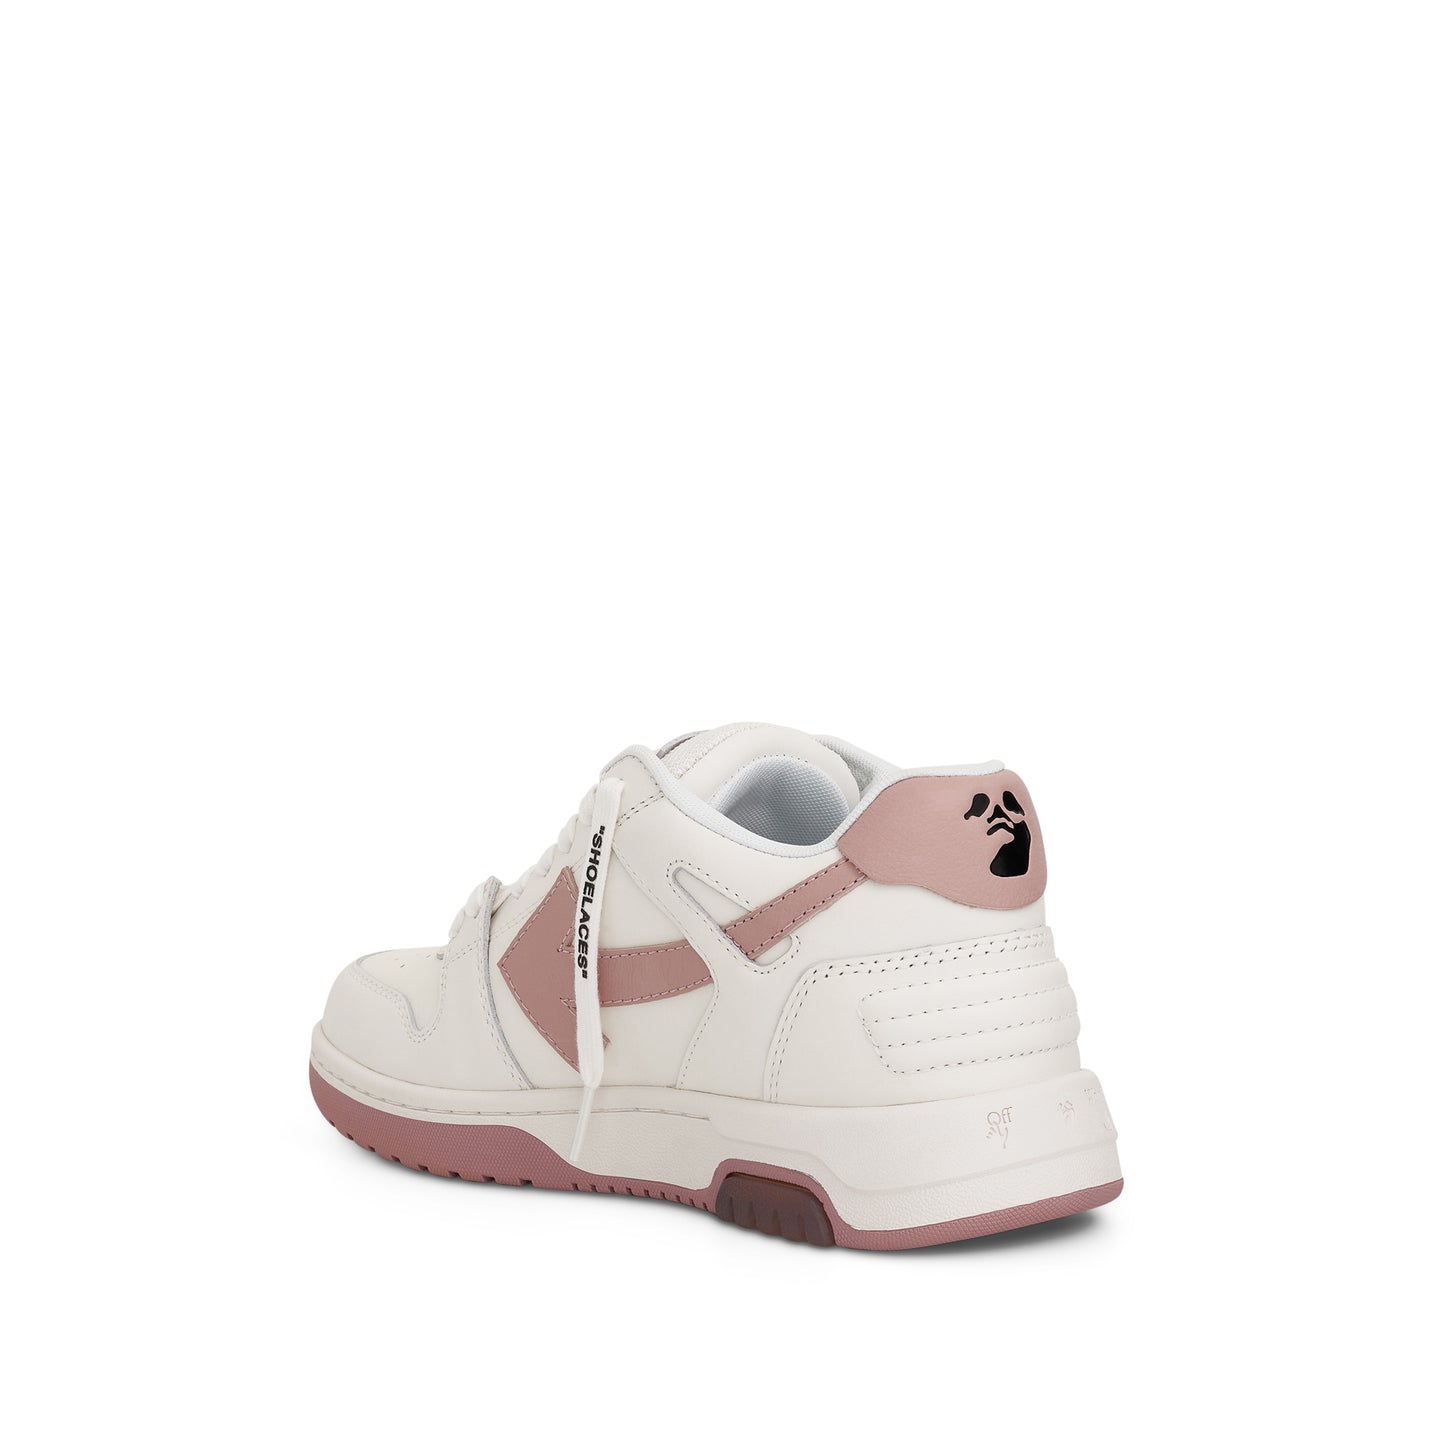 Out Of Office Calf Leather Sneaker in White/Pink